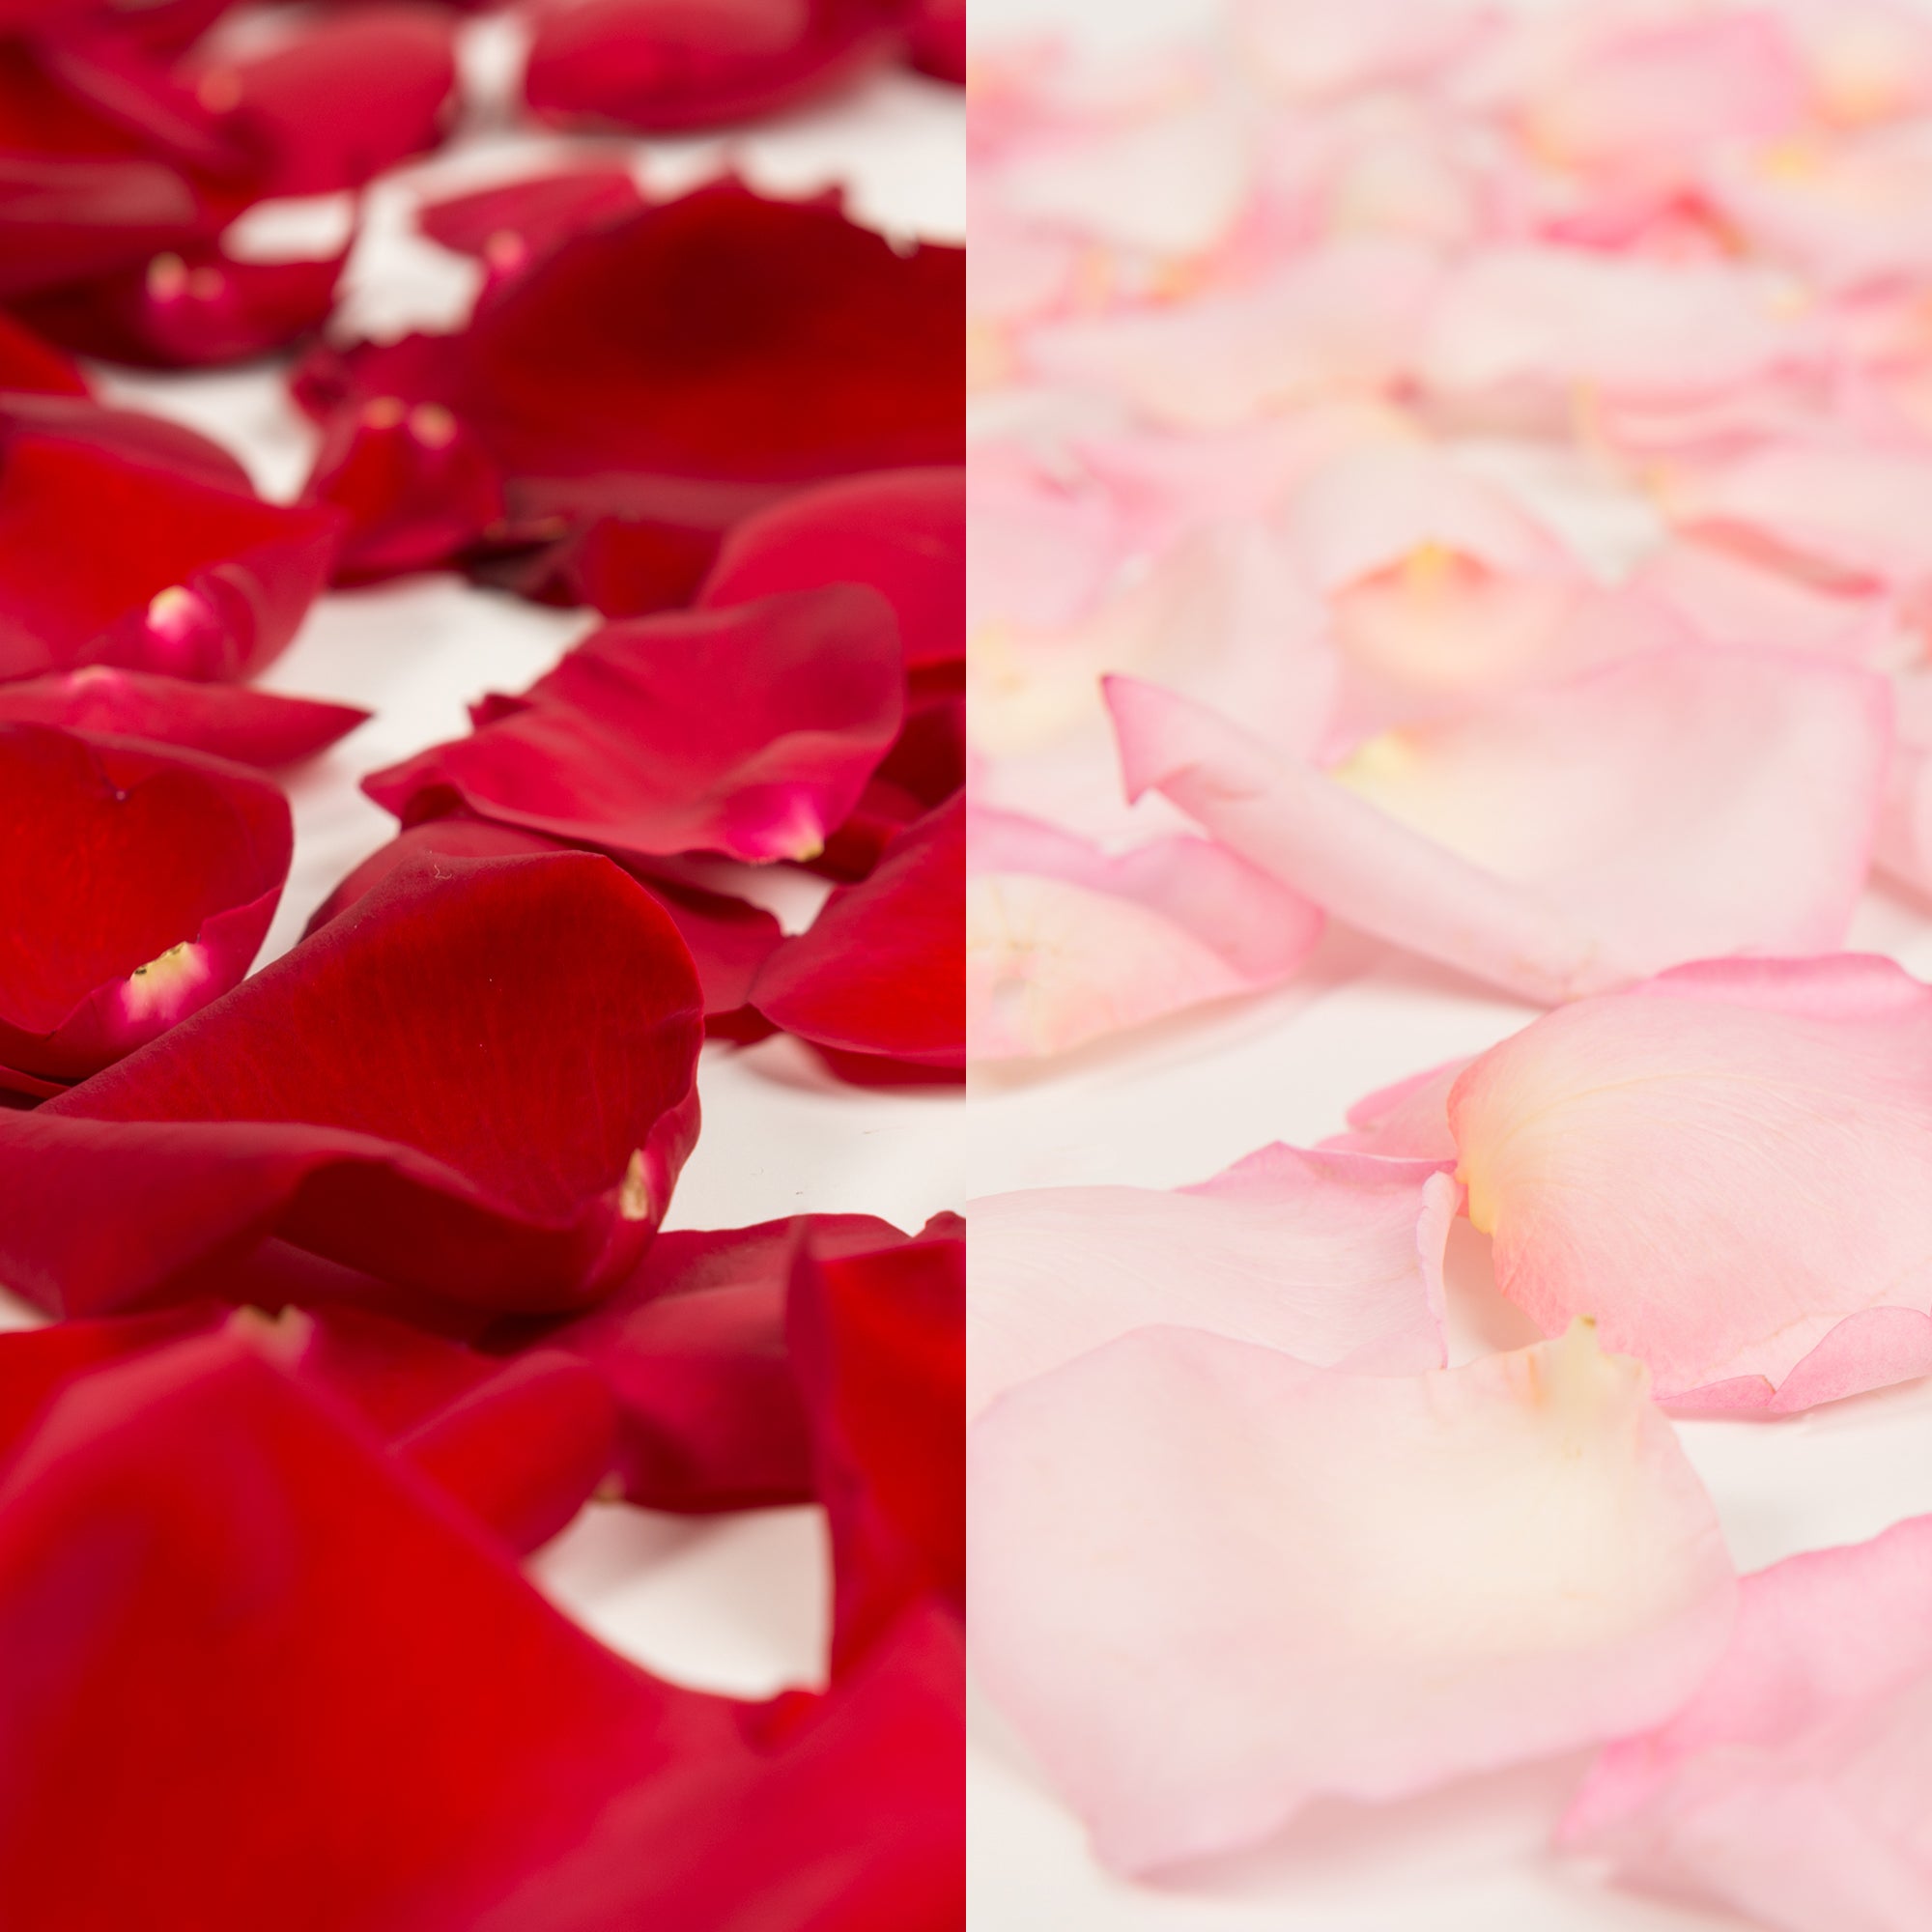 Rose Petals 3 Bags of Pink Farm Direct Fresh Cut Flower Petals by Bloomingmore, Size: 250 Gr